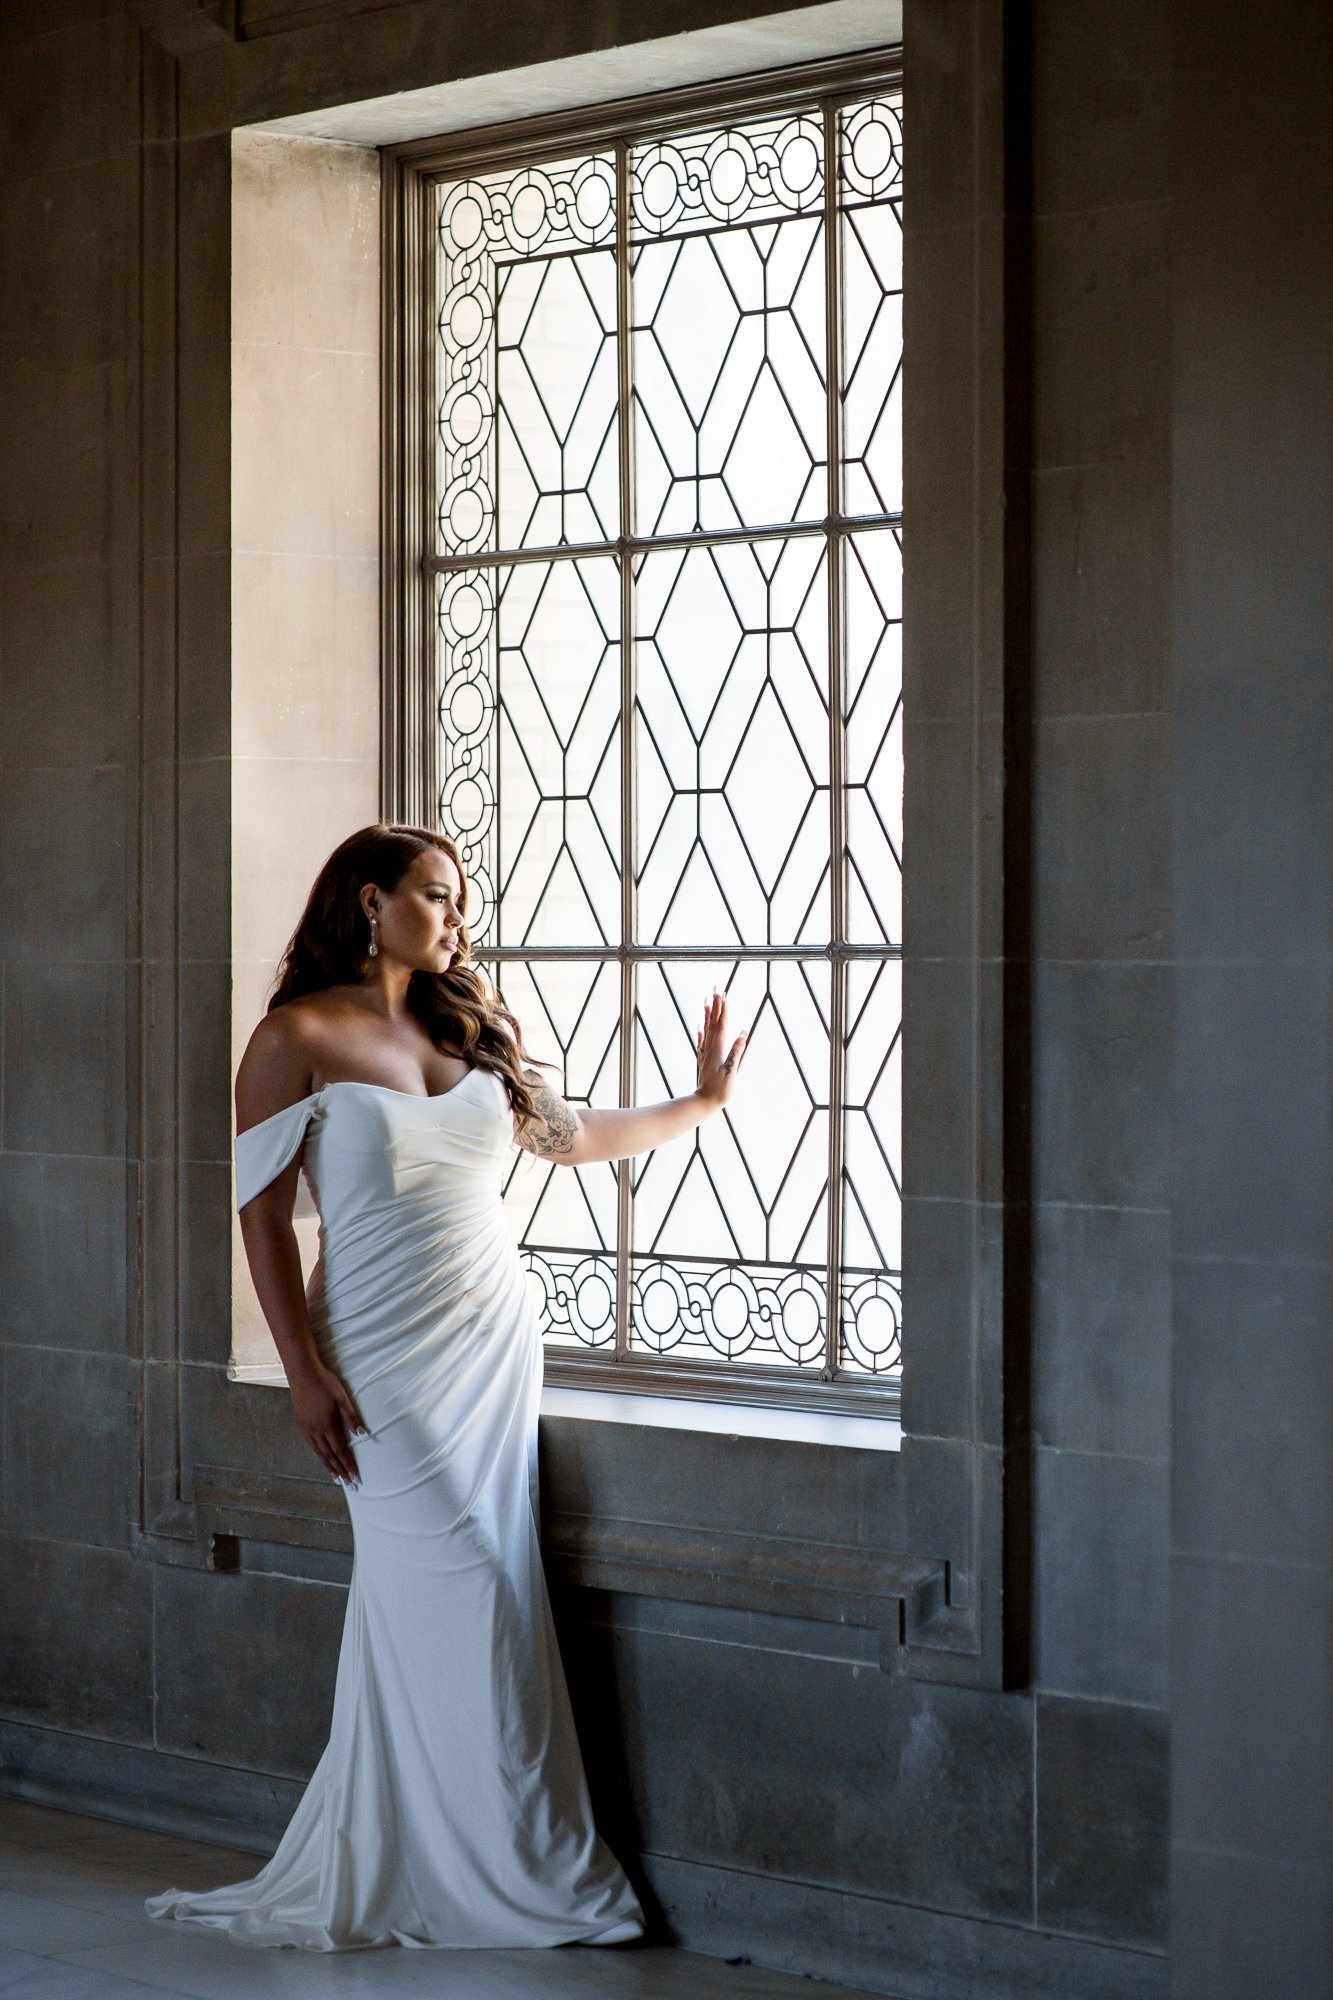  Beautiful bride at San Francisco City Hall looking out the window. 